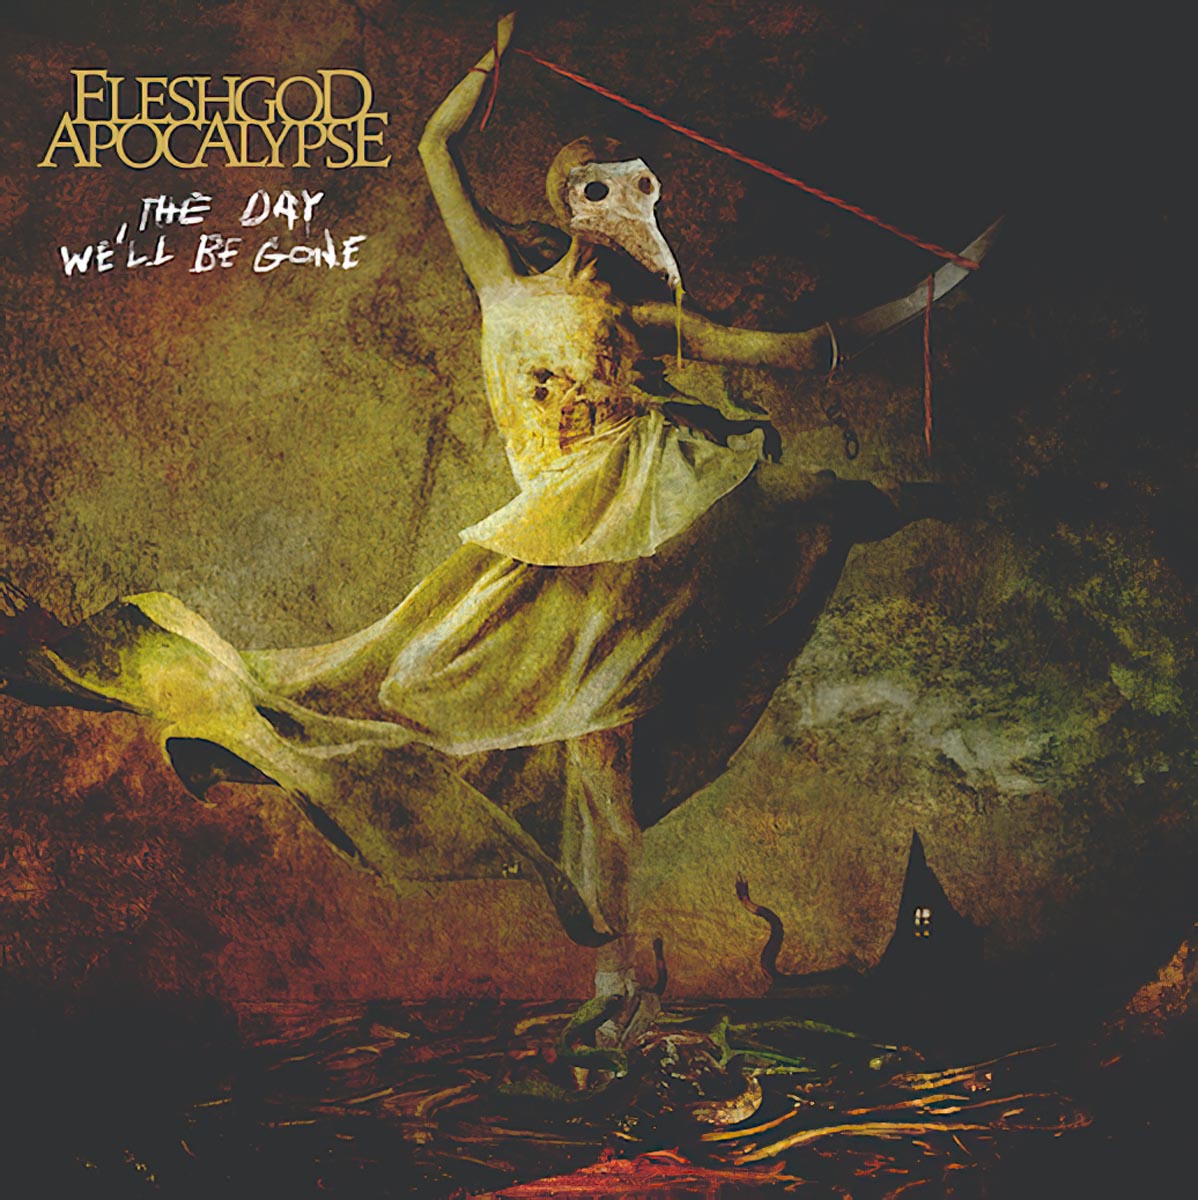 FLESHGOD APOCALYPSE Unplugs for New Acoustic Single “The Day We’ll Be